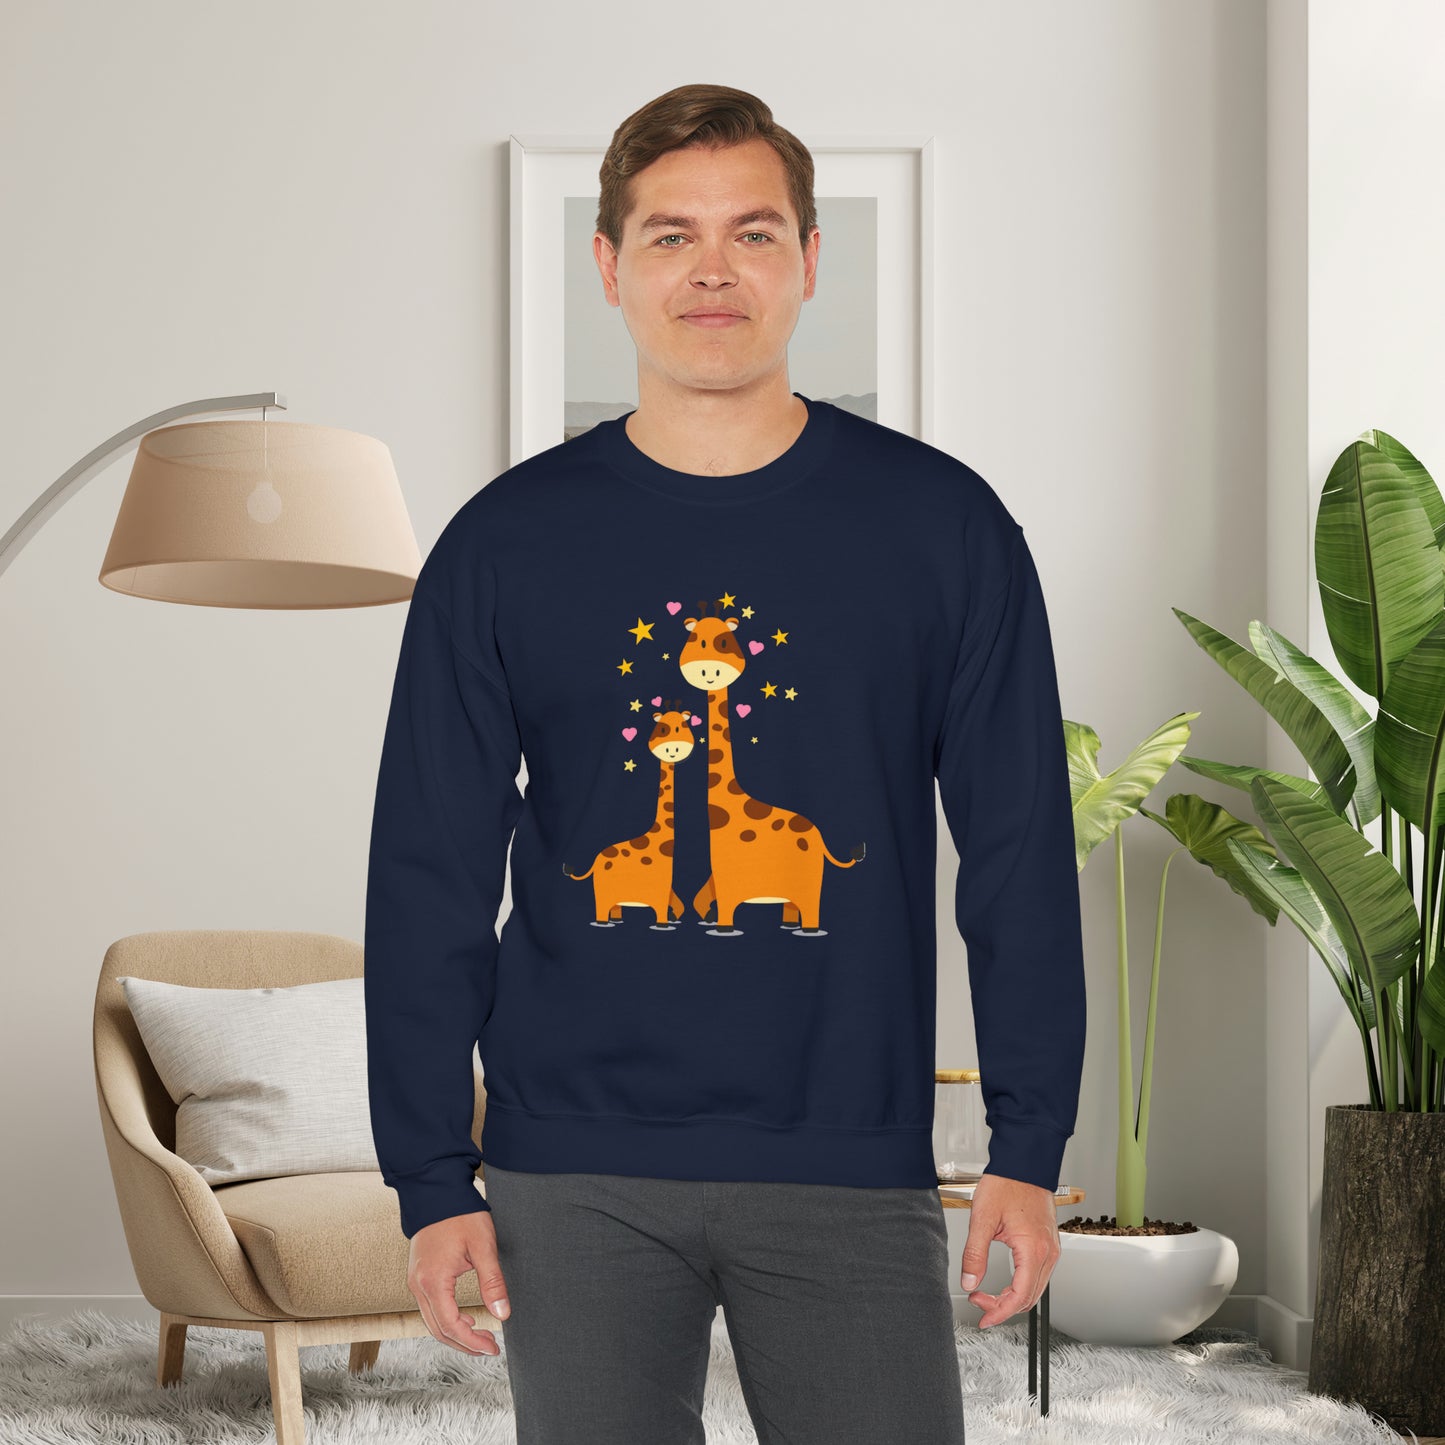 Love giraffes? Here’s the sweatshirt for you, celebrating adorable mama and baby giraffe love! Give the gift of this Unisex Heavy Blend™ Crewneck Sweatshirt or get one for yourself.